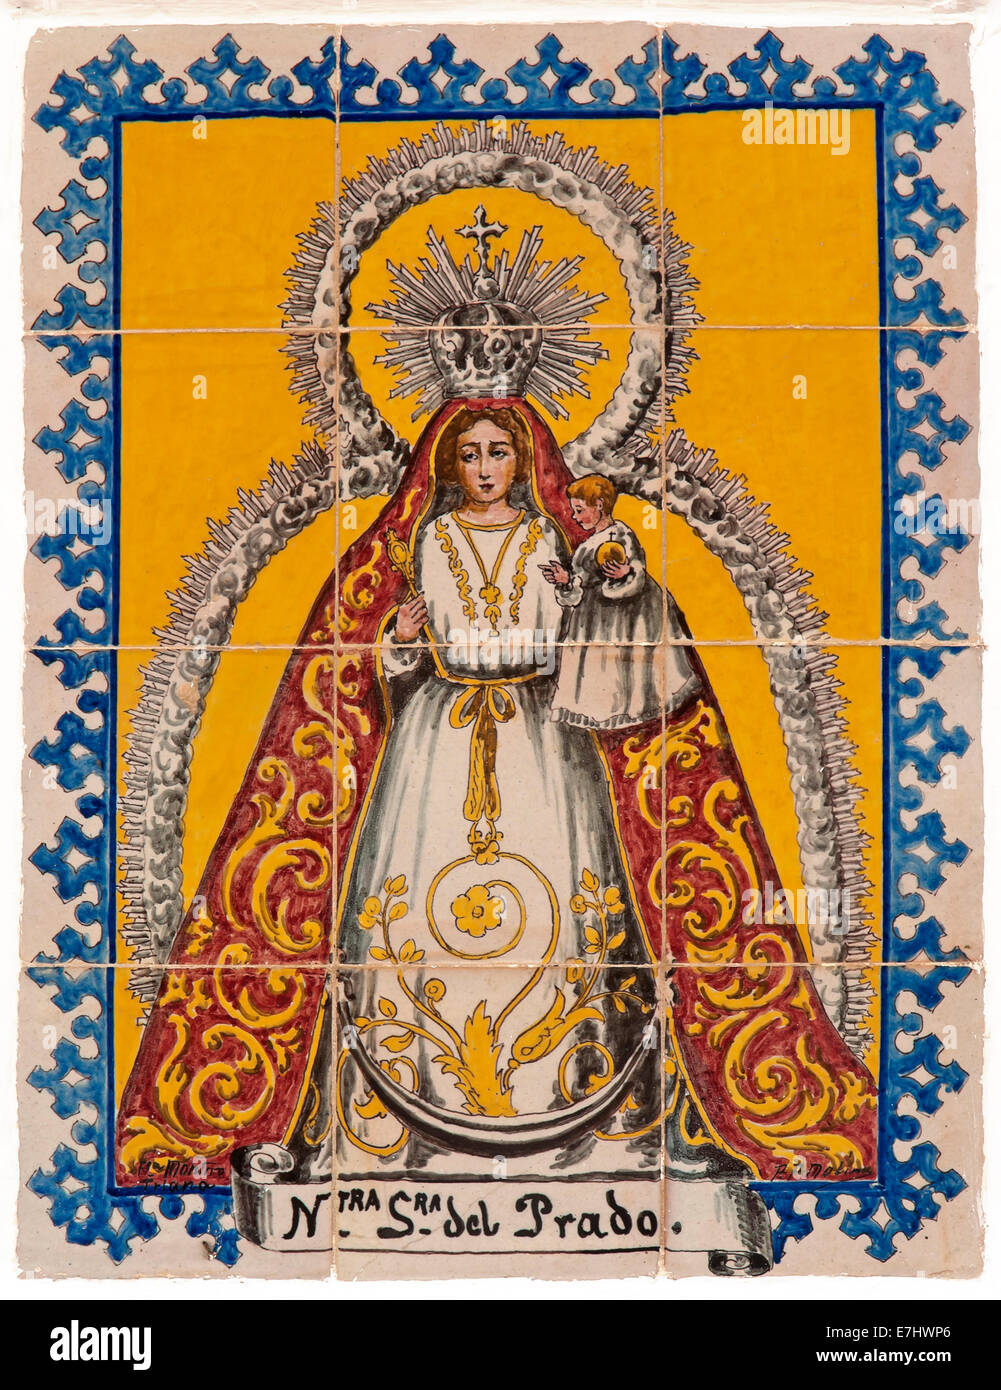 Virgen del prado High Resolution Stock Photography and Images - Alamy